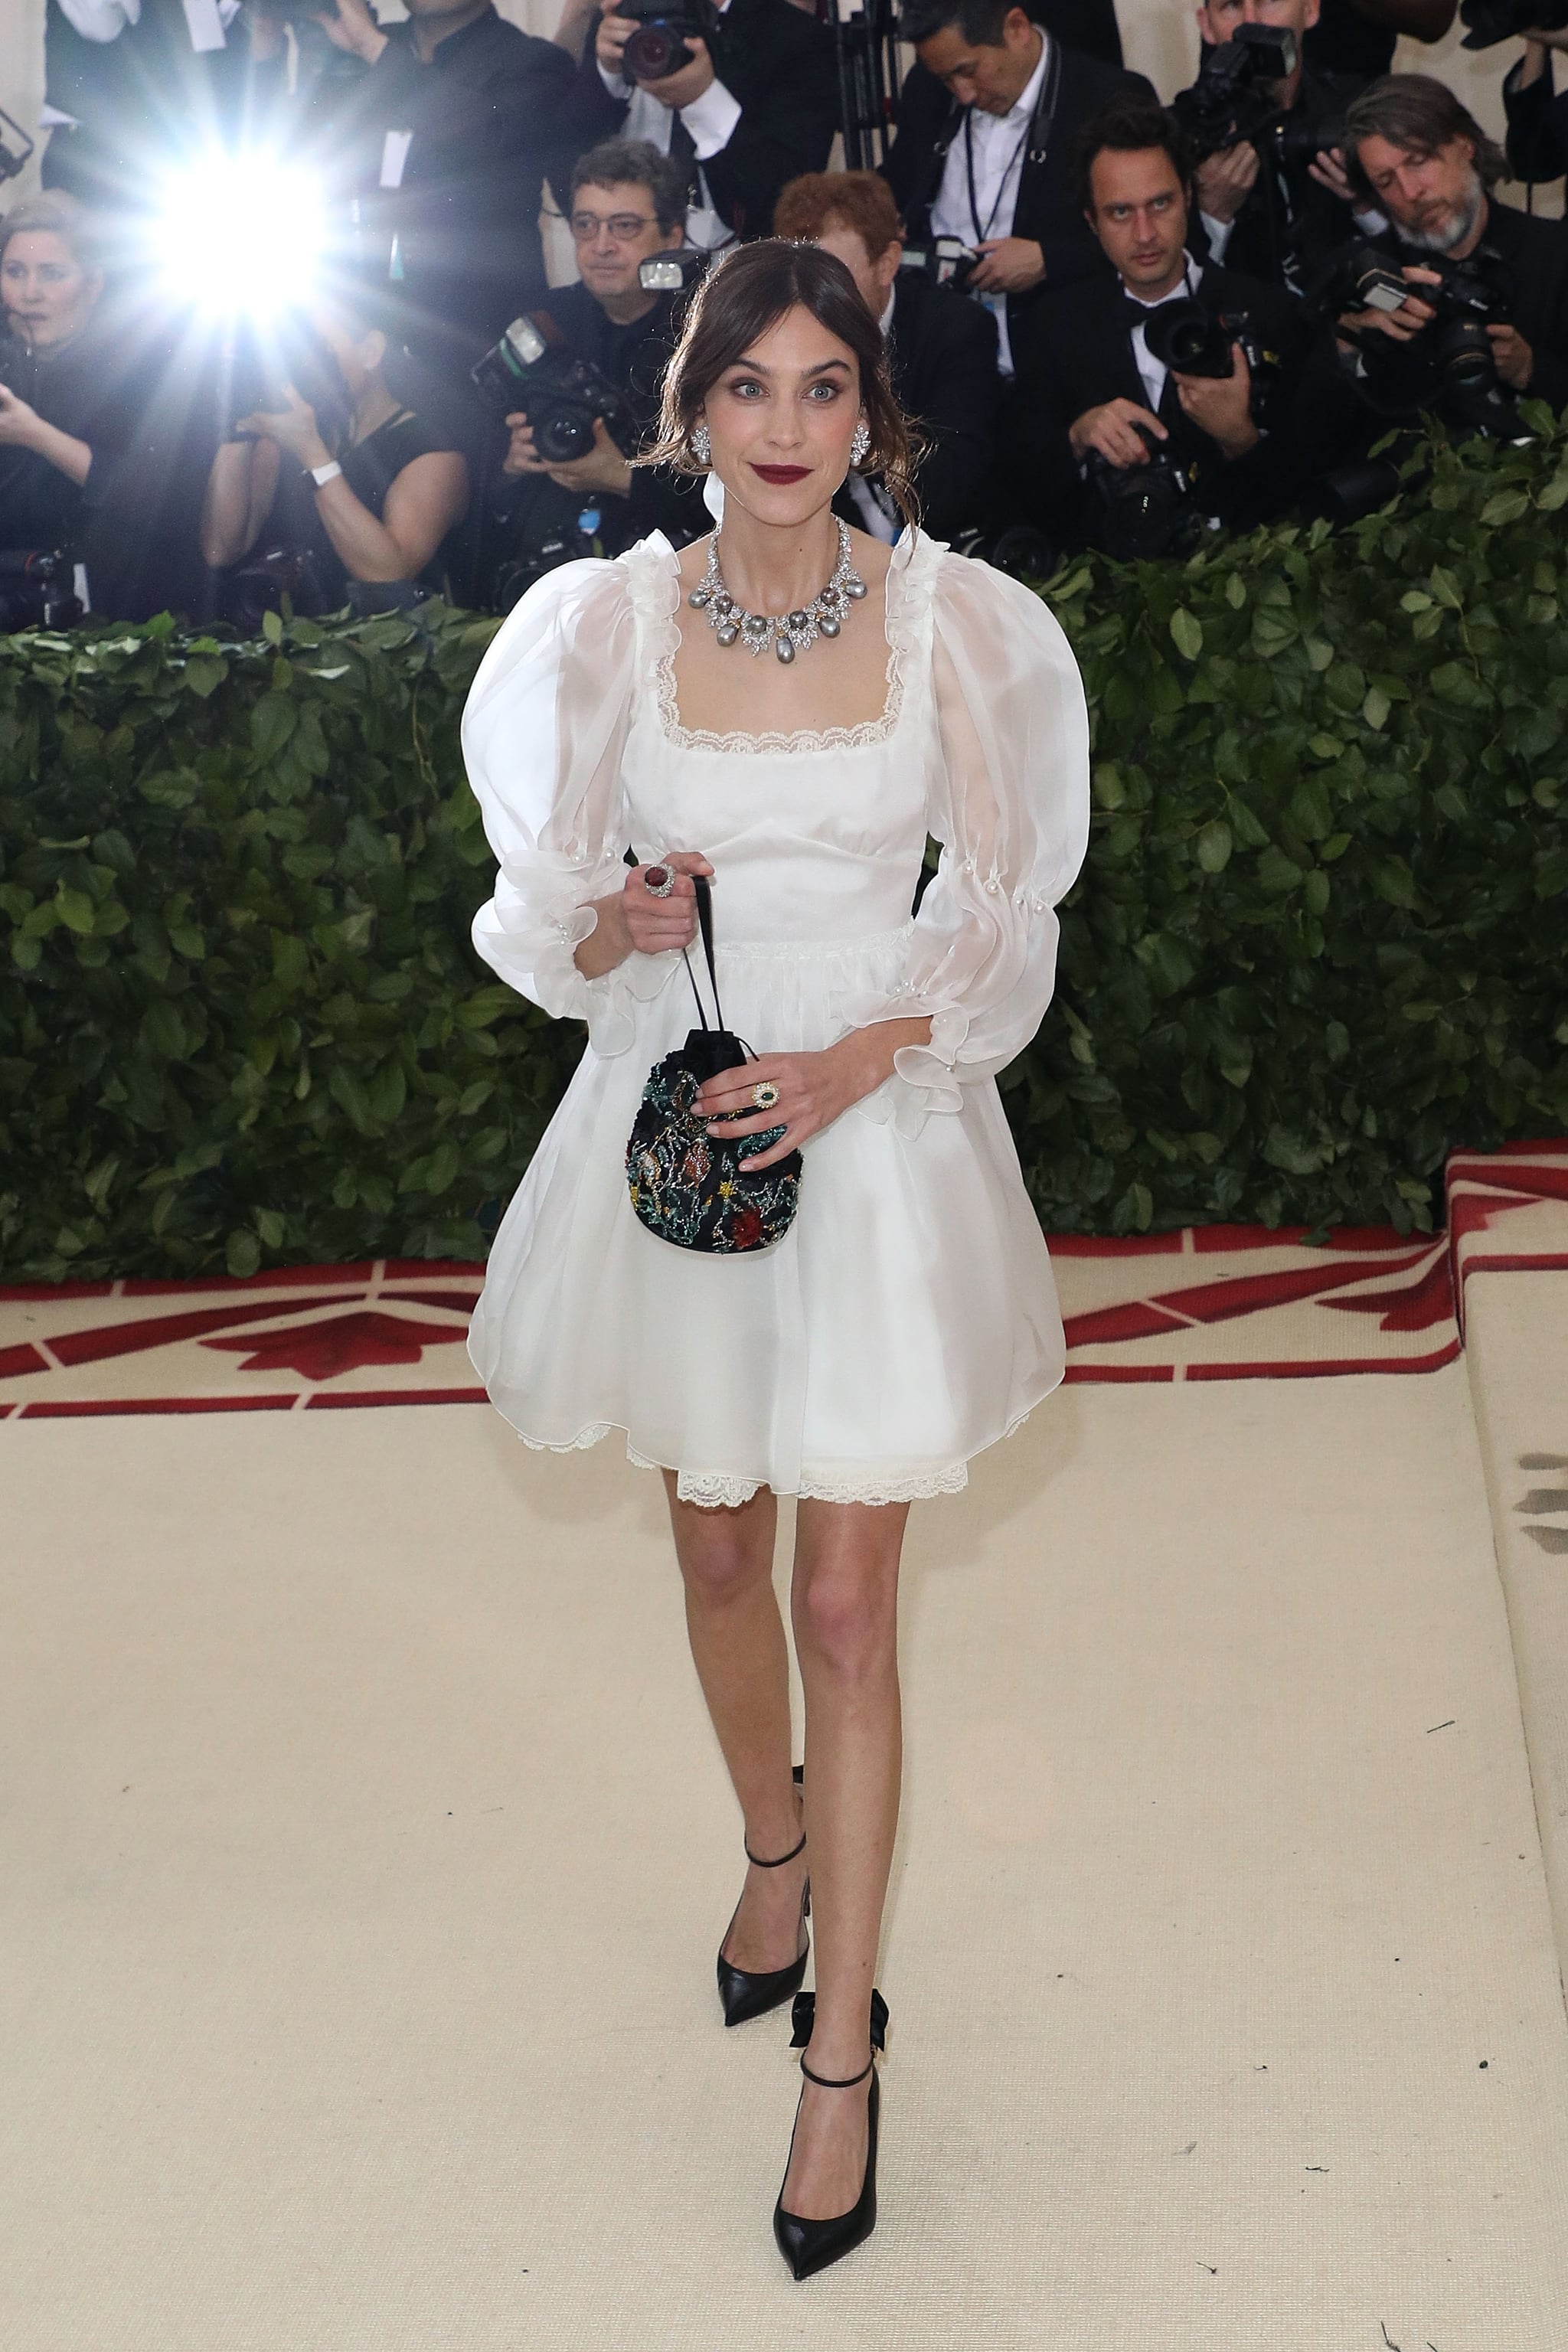 ødemark udstilling Onset Alexa Chung | Every Look at the 2018 Met Gala Was Bold Enough to Leave an  Impression | POPSUGAR Fashion Photo 30